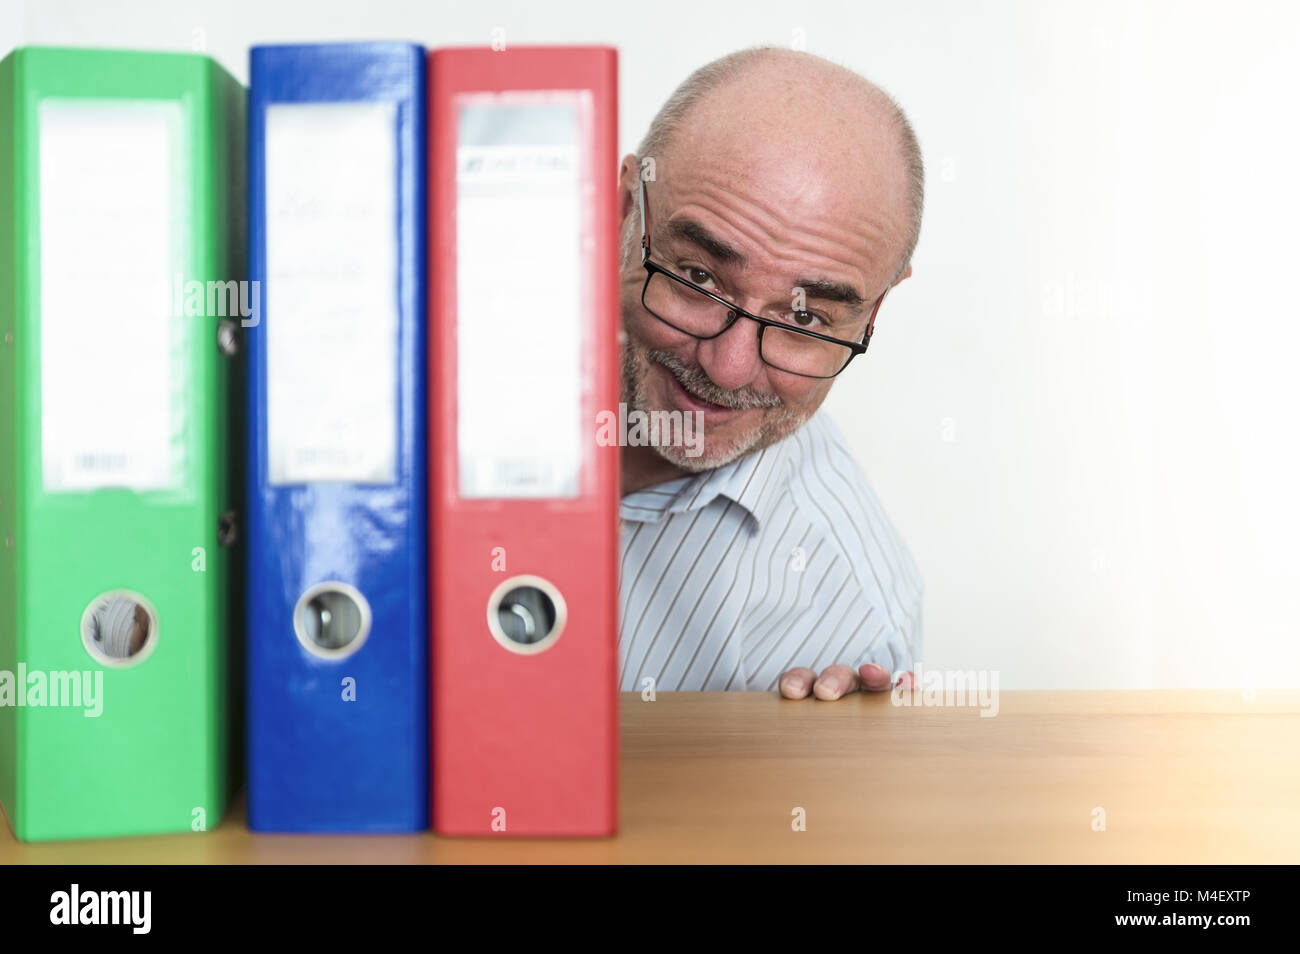 An official greeted happily behind his files. Stock Photo